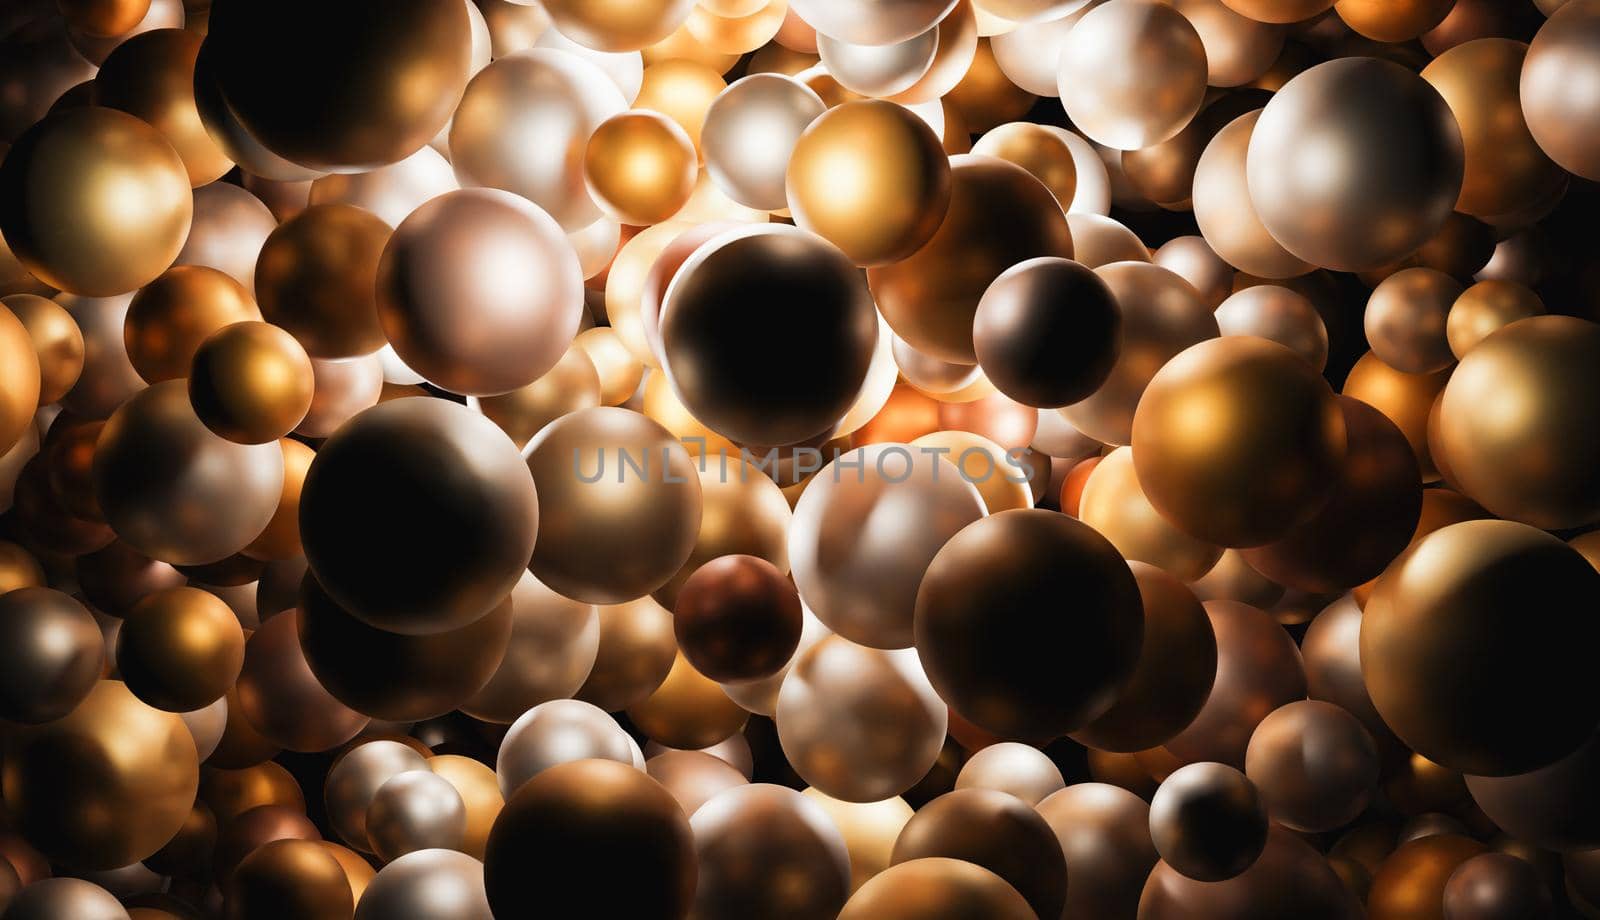 gold spheres background by asolano